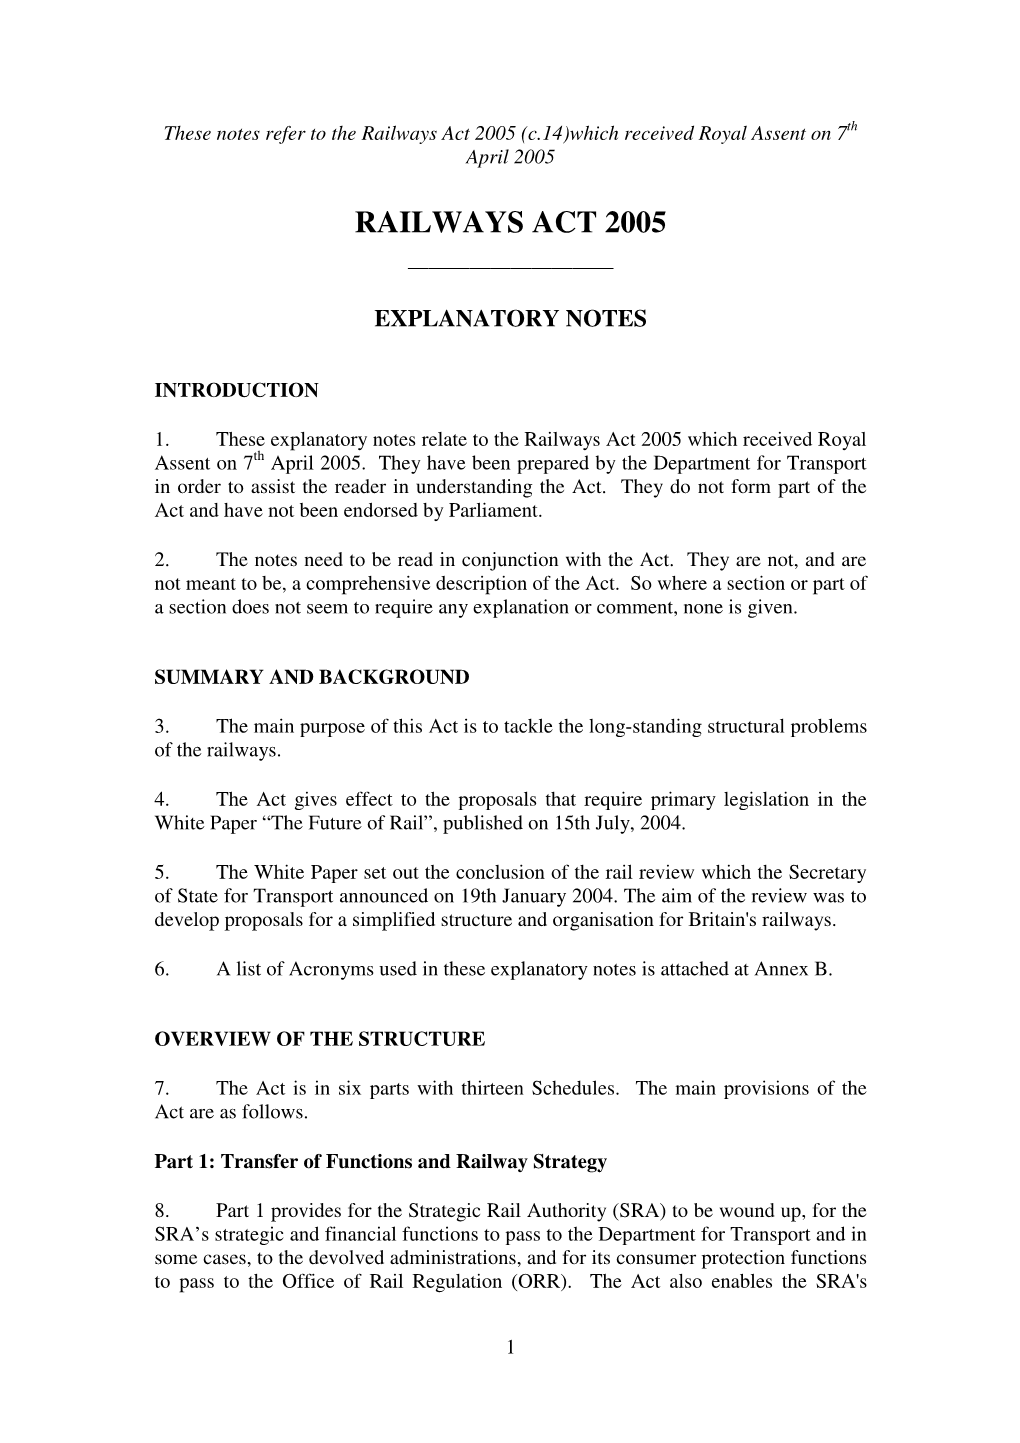 Railways Act 2005 (C.14)Which Received Royal Assent on 7Th April 2005